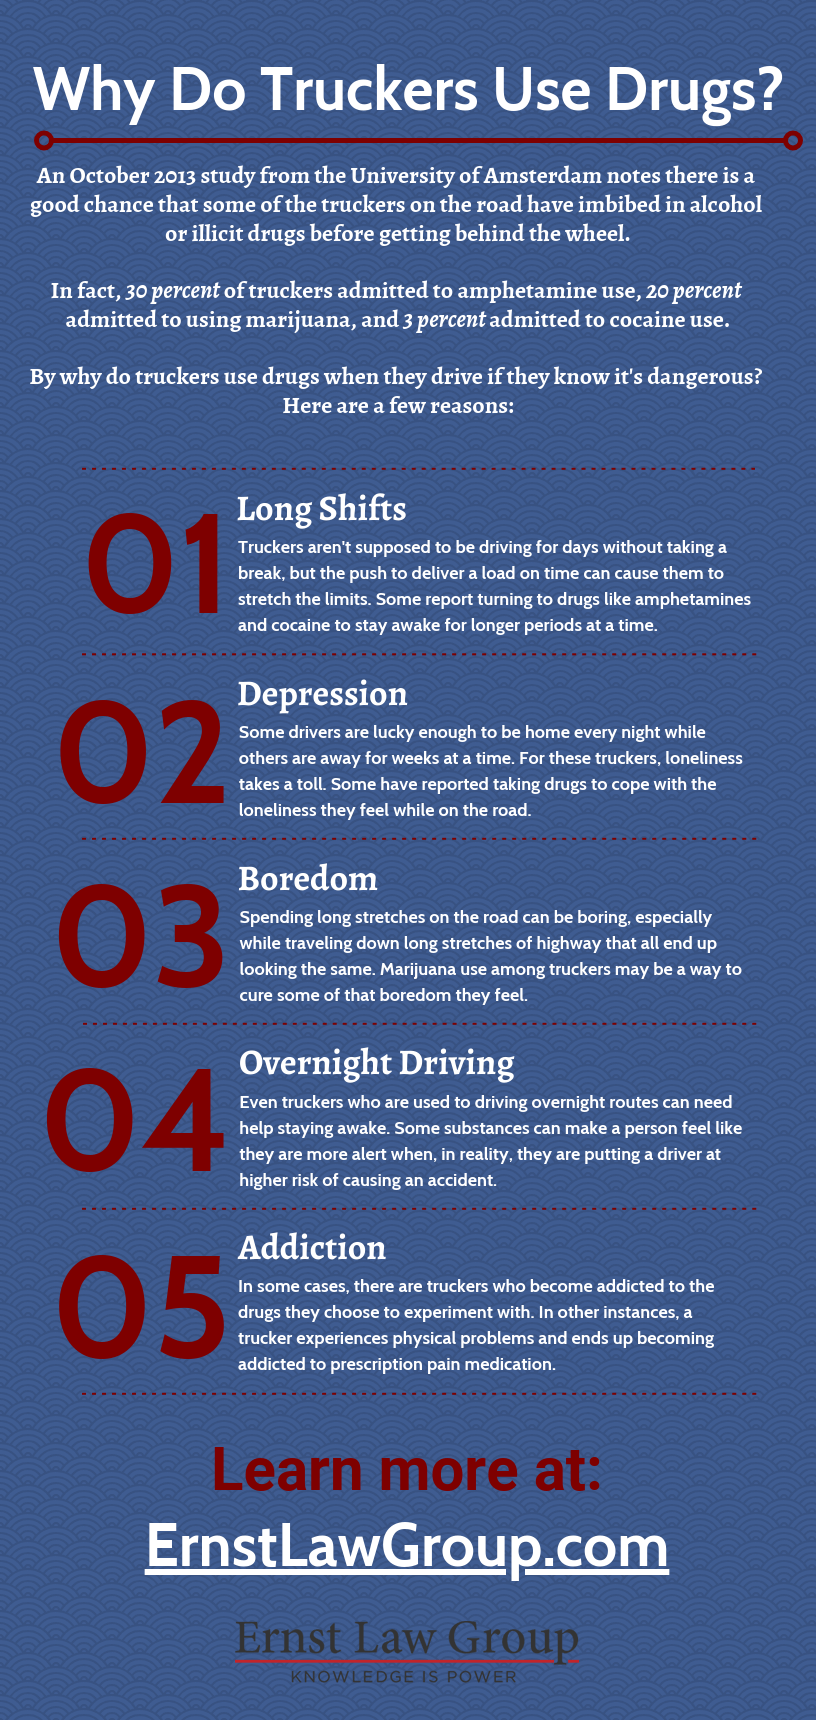 Why Do Truckers Use Drugs infographic